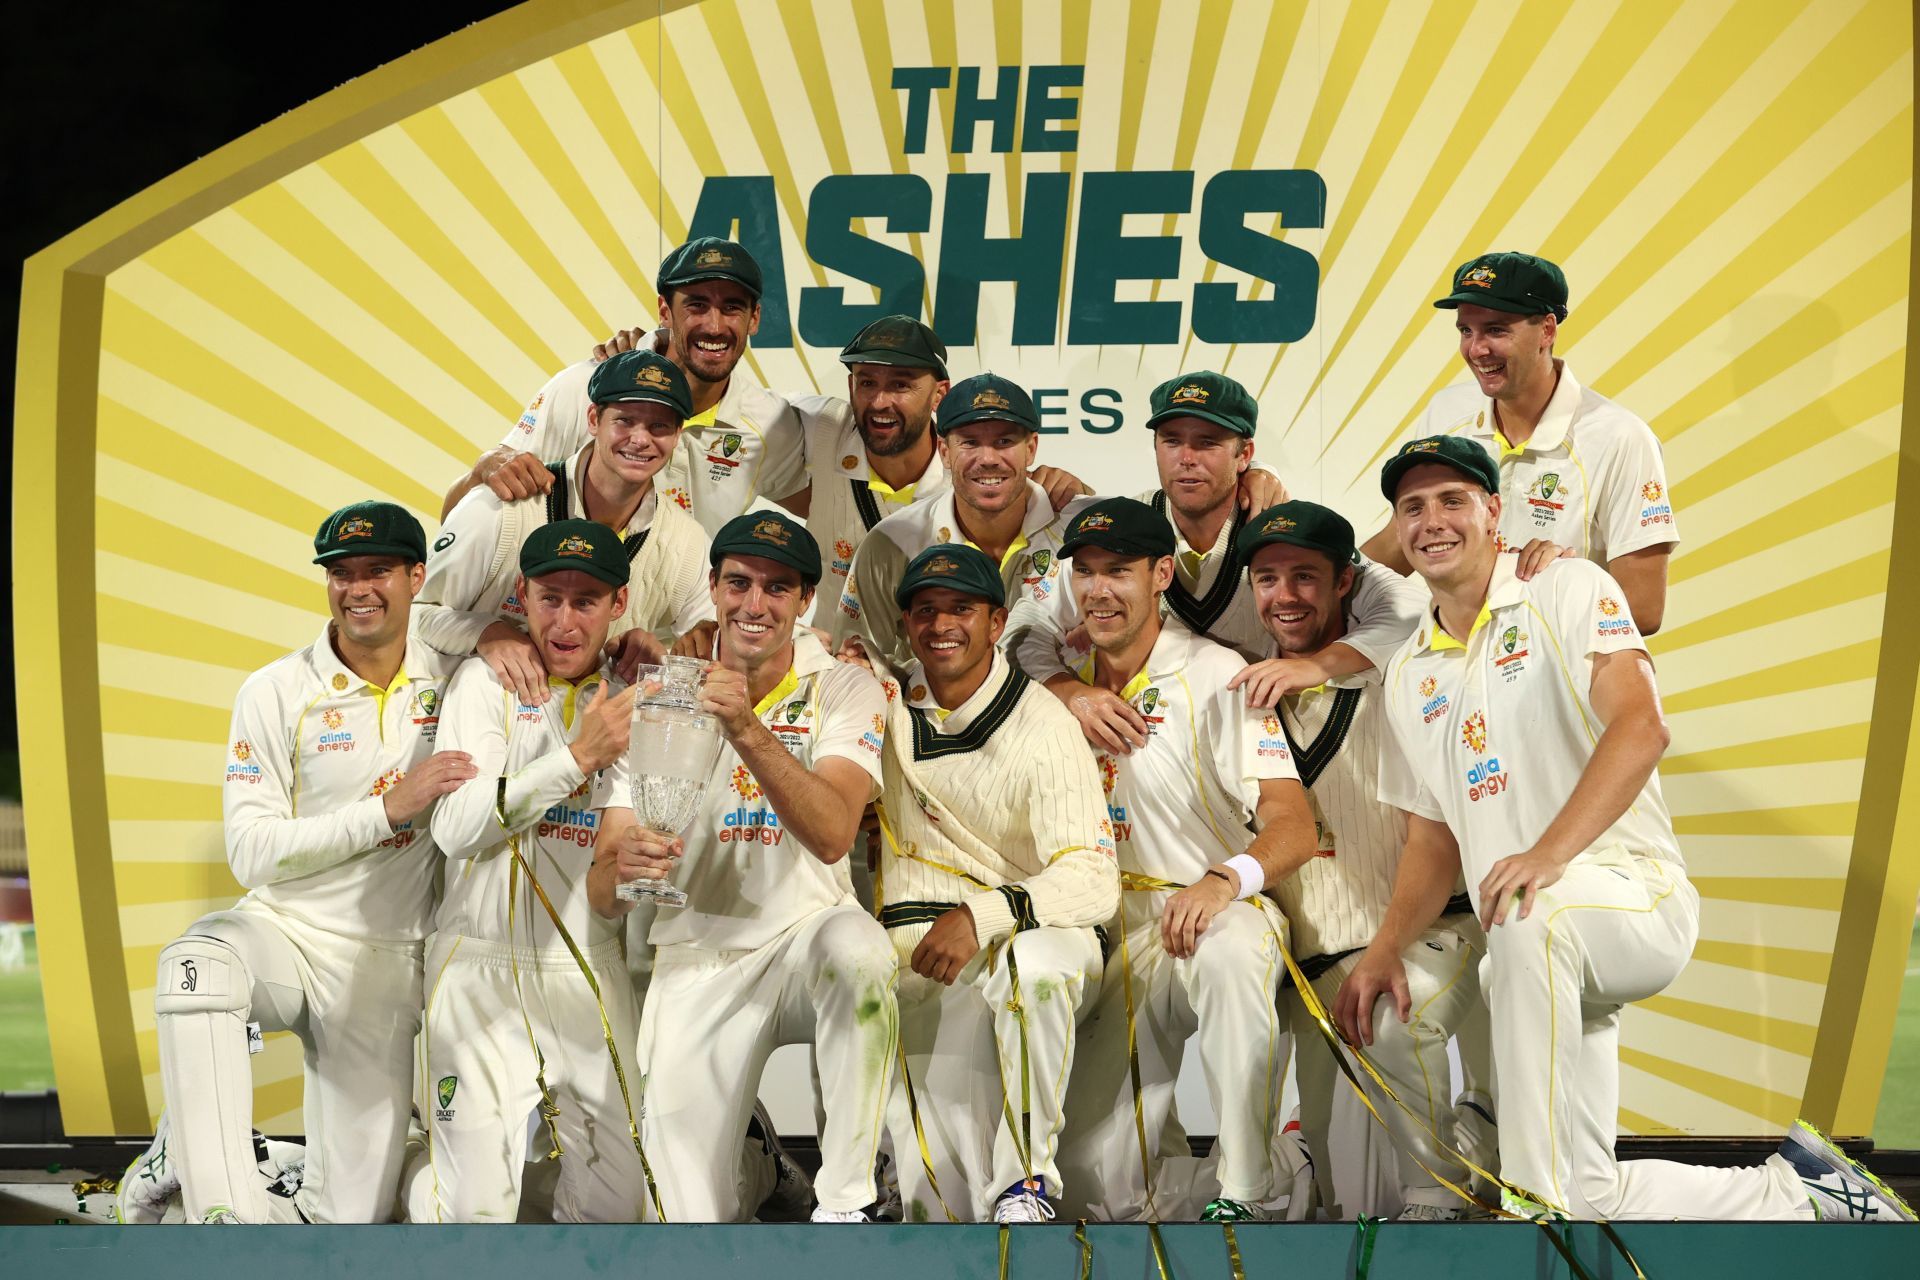 Australia v England: Australia are awarded the urn after winning the series 4-0, Hobart